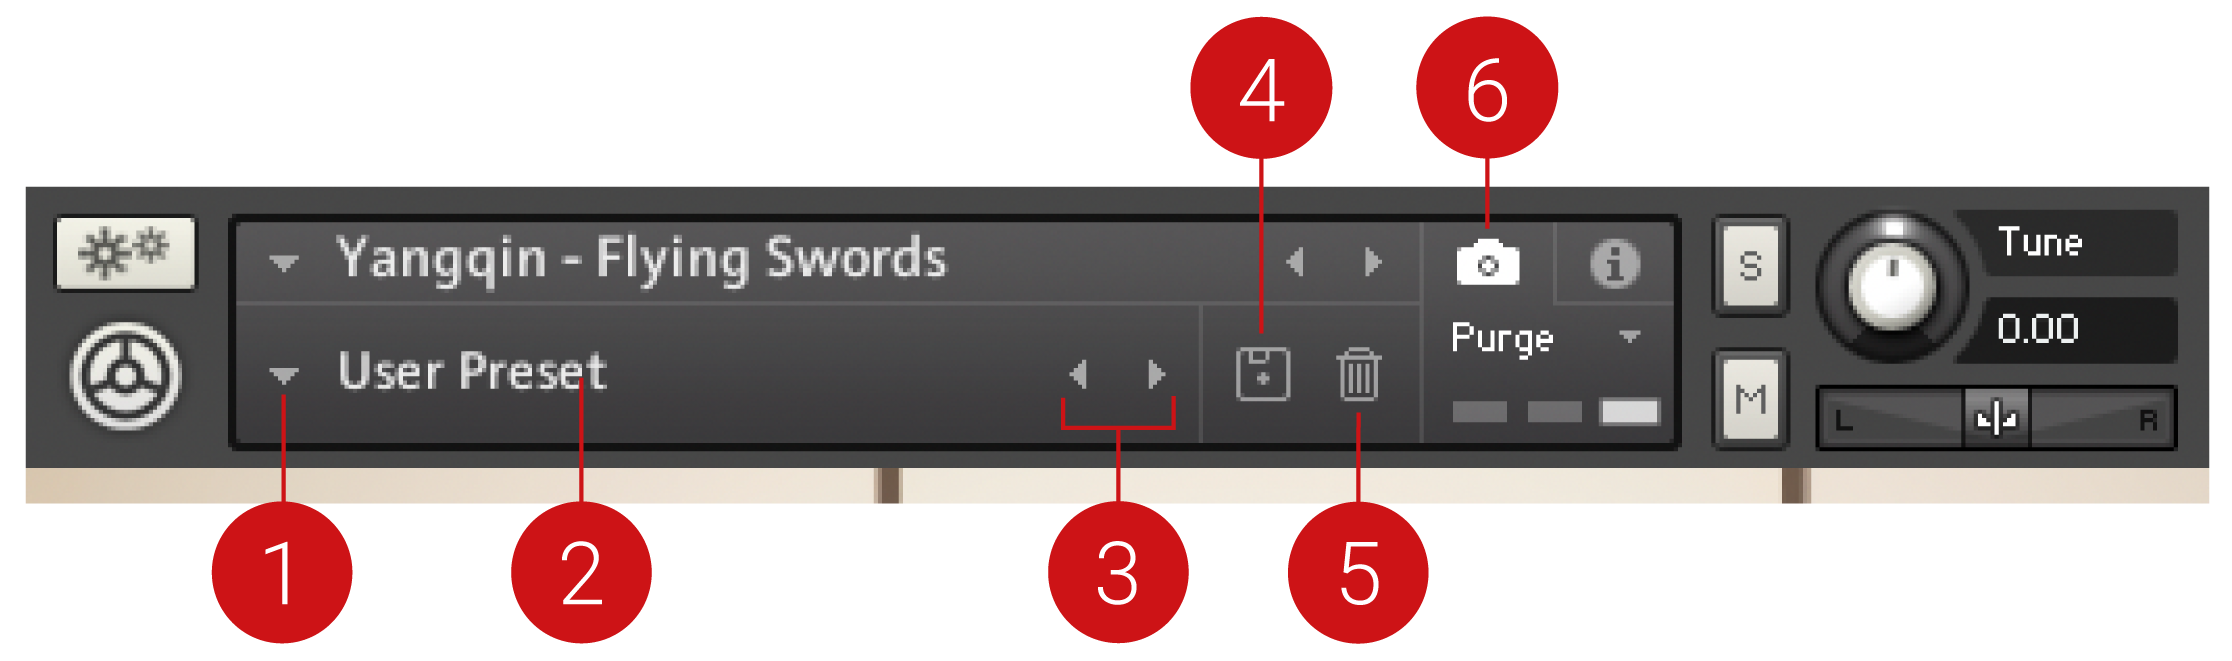 The snapshot menu of an instrument consists, from left to right: a button to load snapshots, the snapshot name, left and right buttons to select snapshots, a button to save snapshots, a button to delete snapshots, and a view button to show or hide snapshots.